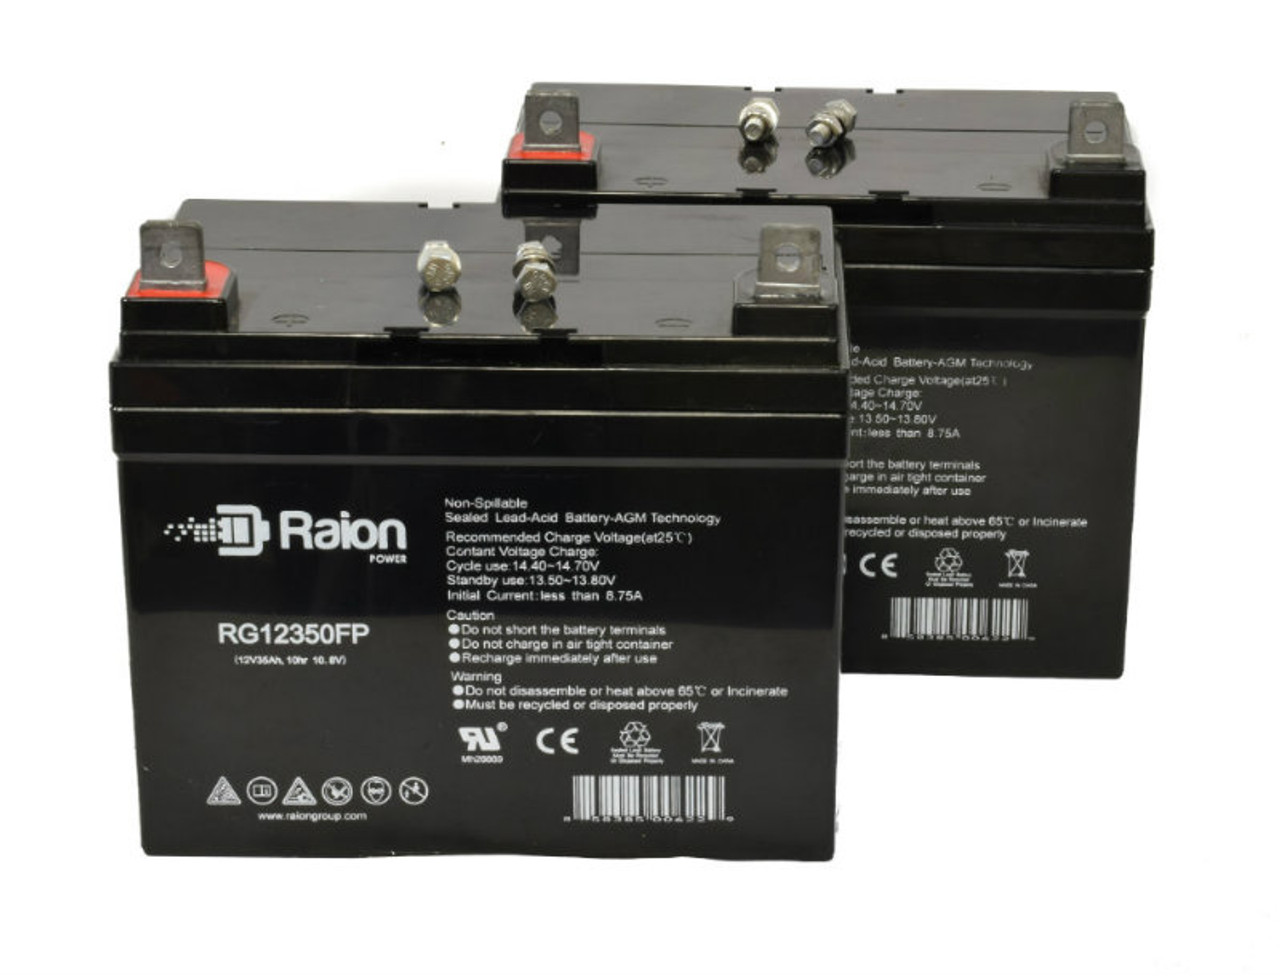 Raion Power Replacement 12V 35Ah Lawn Mower Battery for Cub Cadet 1212 - 2 Pack